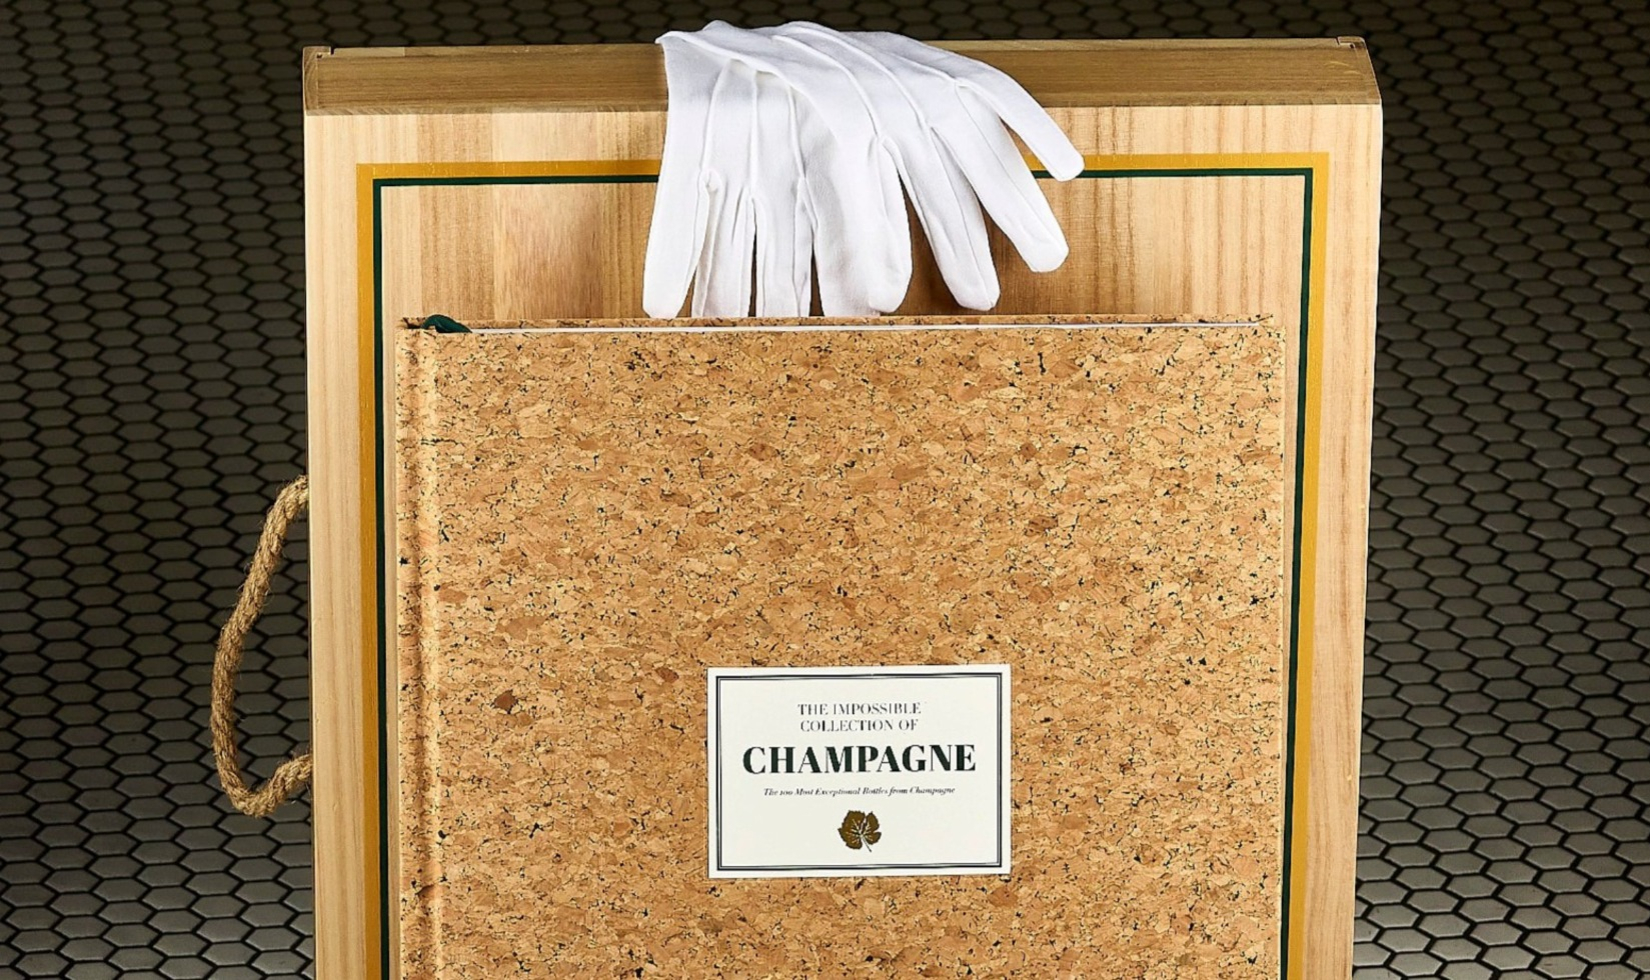 Luxury book with cover made of cork in front of wooden gift box with white reading gloves on top.